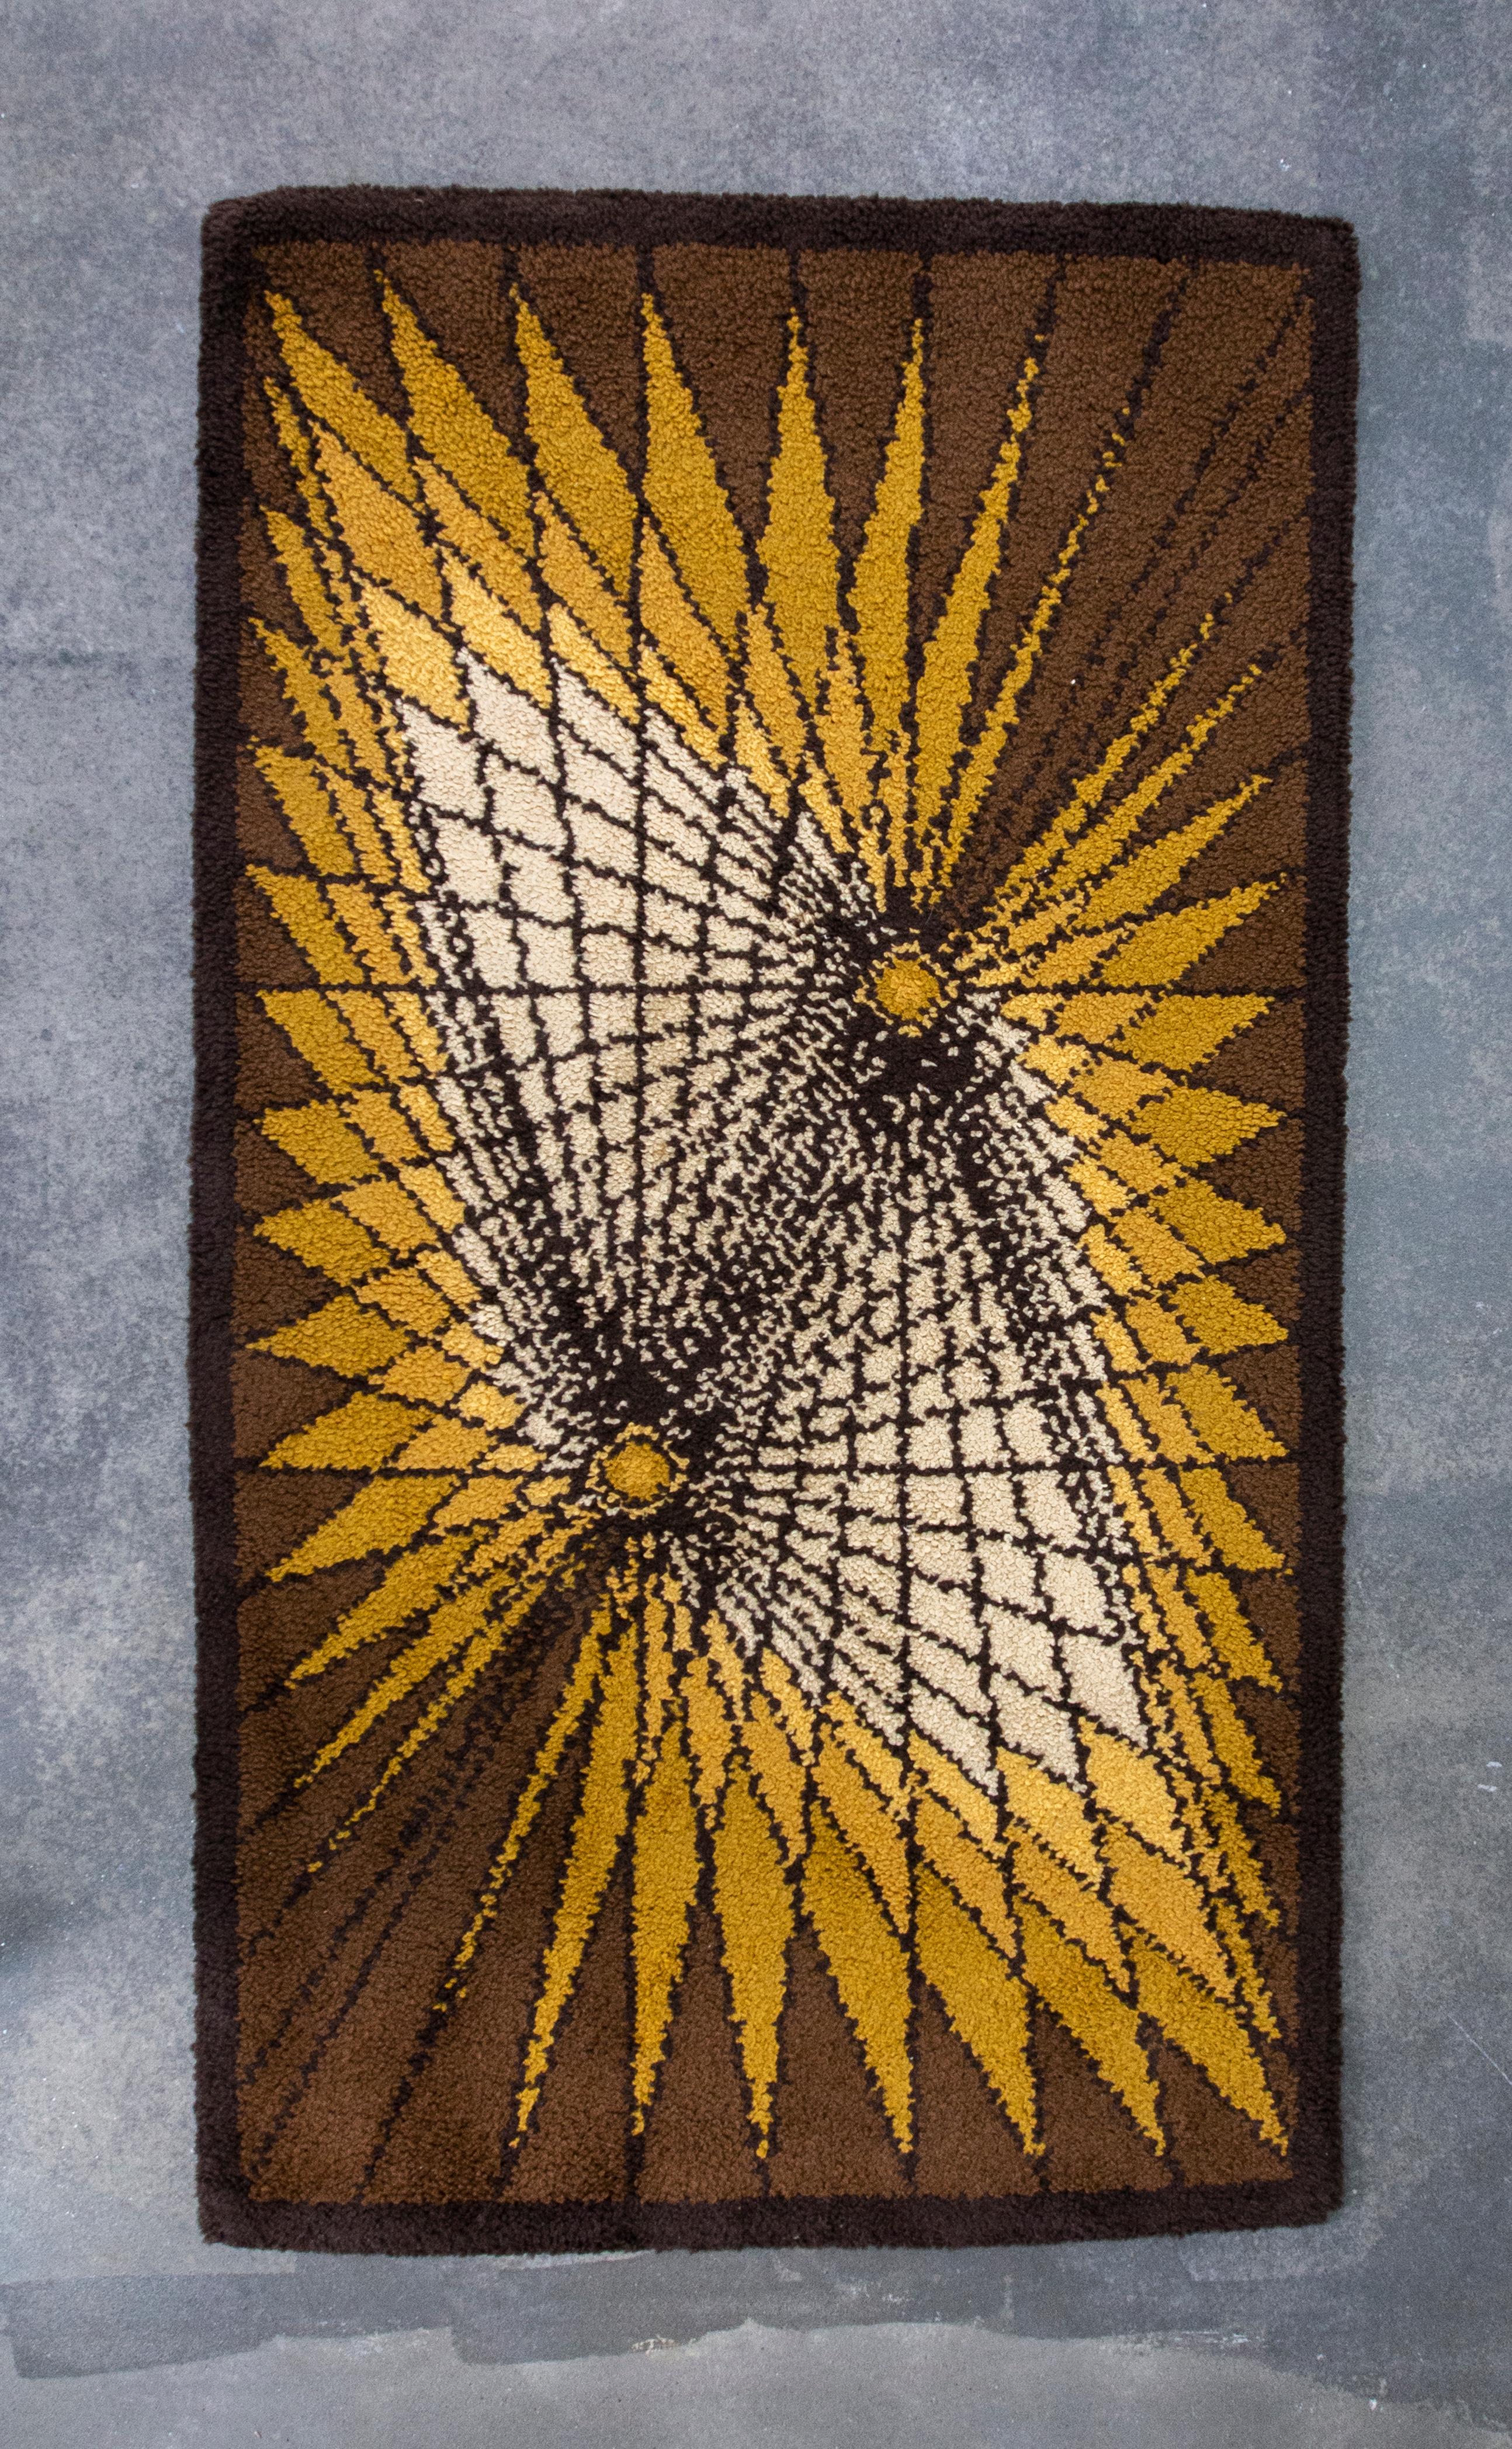 Vintage Small Scandinavian Wool Rya Rug, featuring geometrical patterns in yellow, brown and off-white. This exceptionally decorative rug is a perfect example of 1970s rug design in Northern Europe. The rug is in very good vintage condition with no